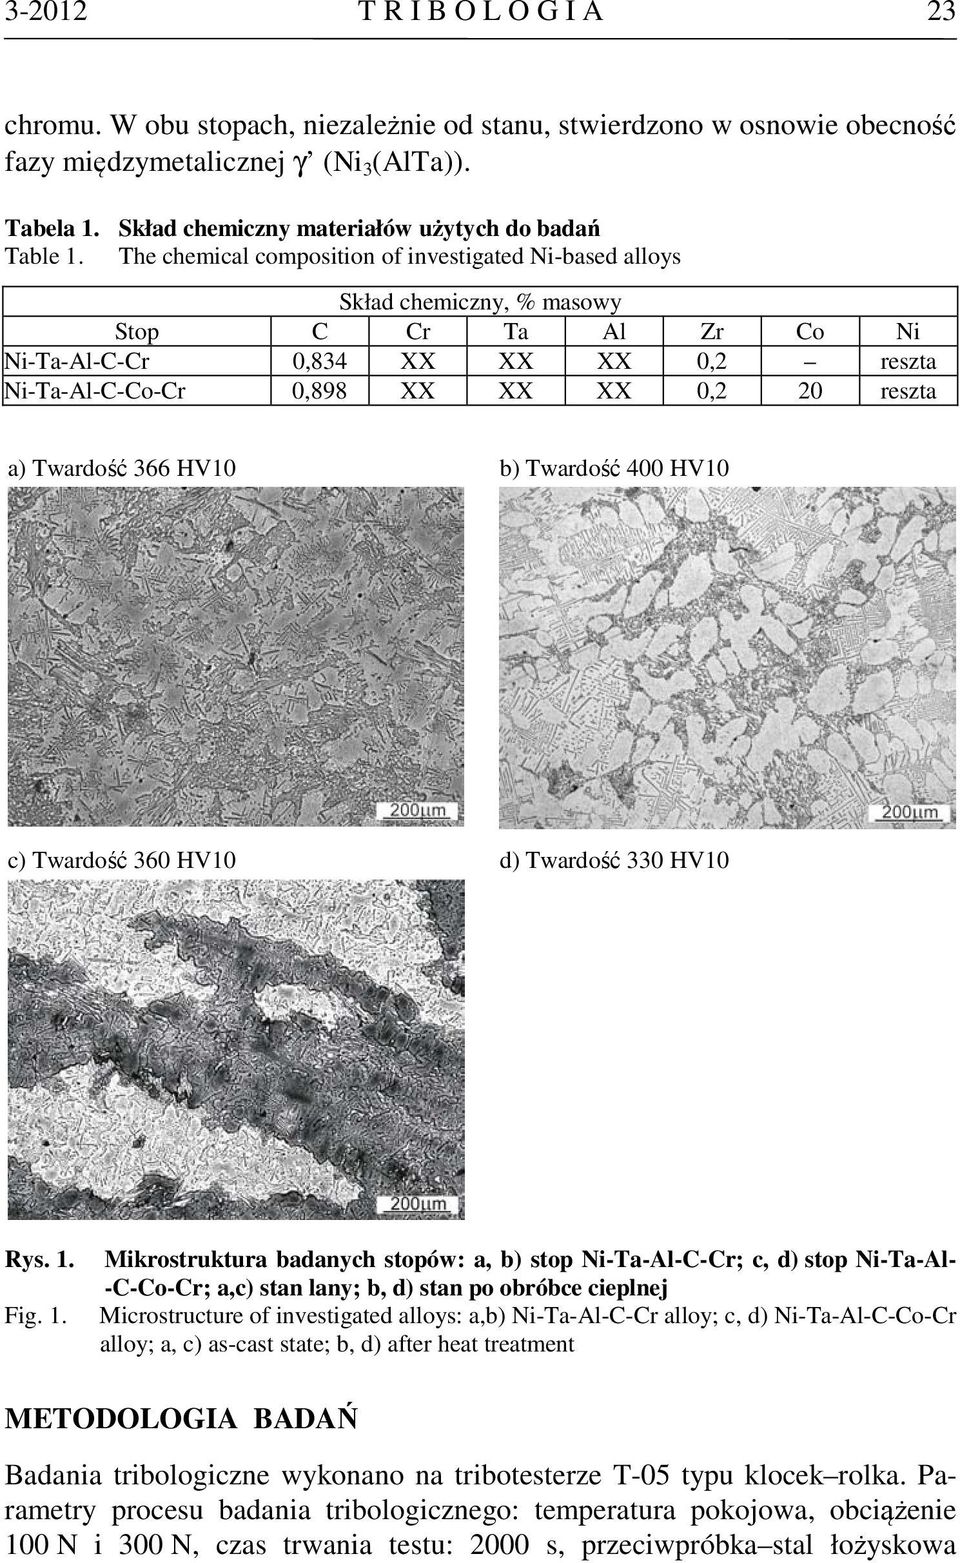 The chemical composition of investigated Ni-based alloys Skład chemiczny, % masowy Stop C Cr Ta Al Zr Co Ni Ni-Ta-Al-C-Cr 0,834 XX XX XX 0,2 reszta Ni-Ta-Al-C-Co-Cr 0,898 XX XX XX 0,2 20 reszta a)